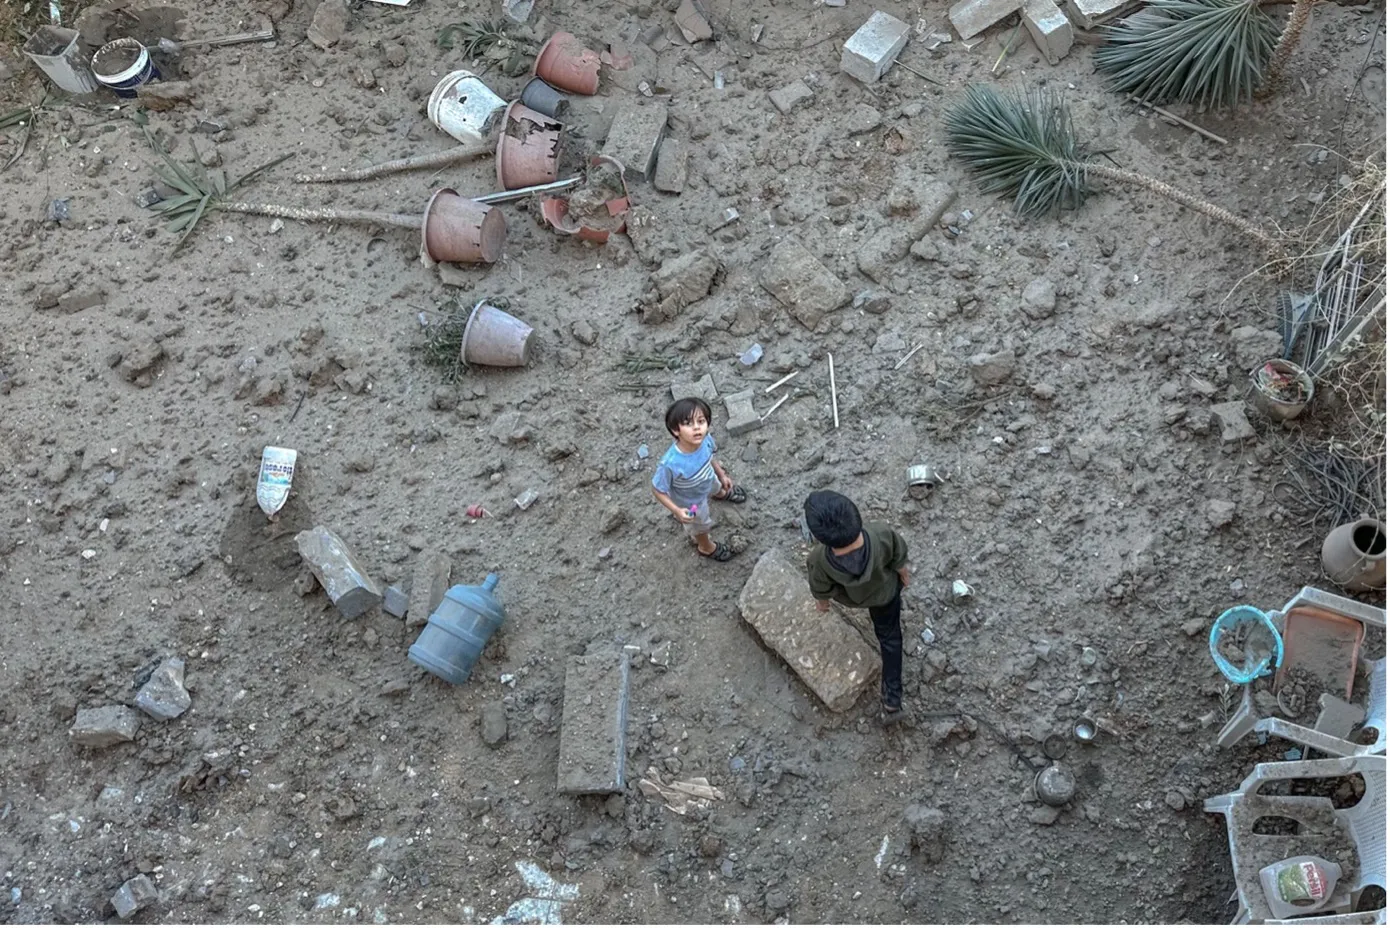 Overhead shot of boy staring up from the middle of a dirt field, another unidentified person walking nearby